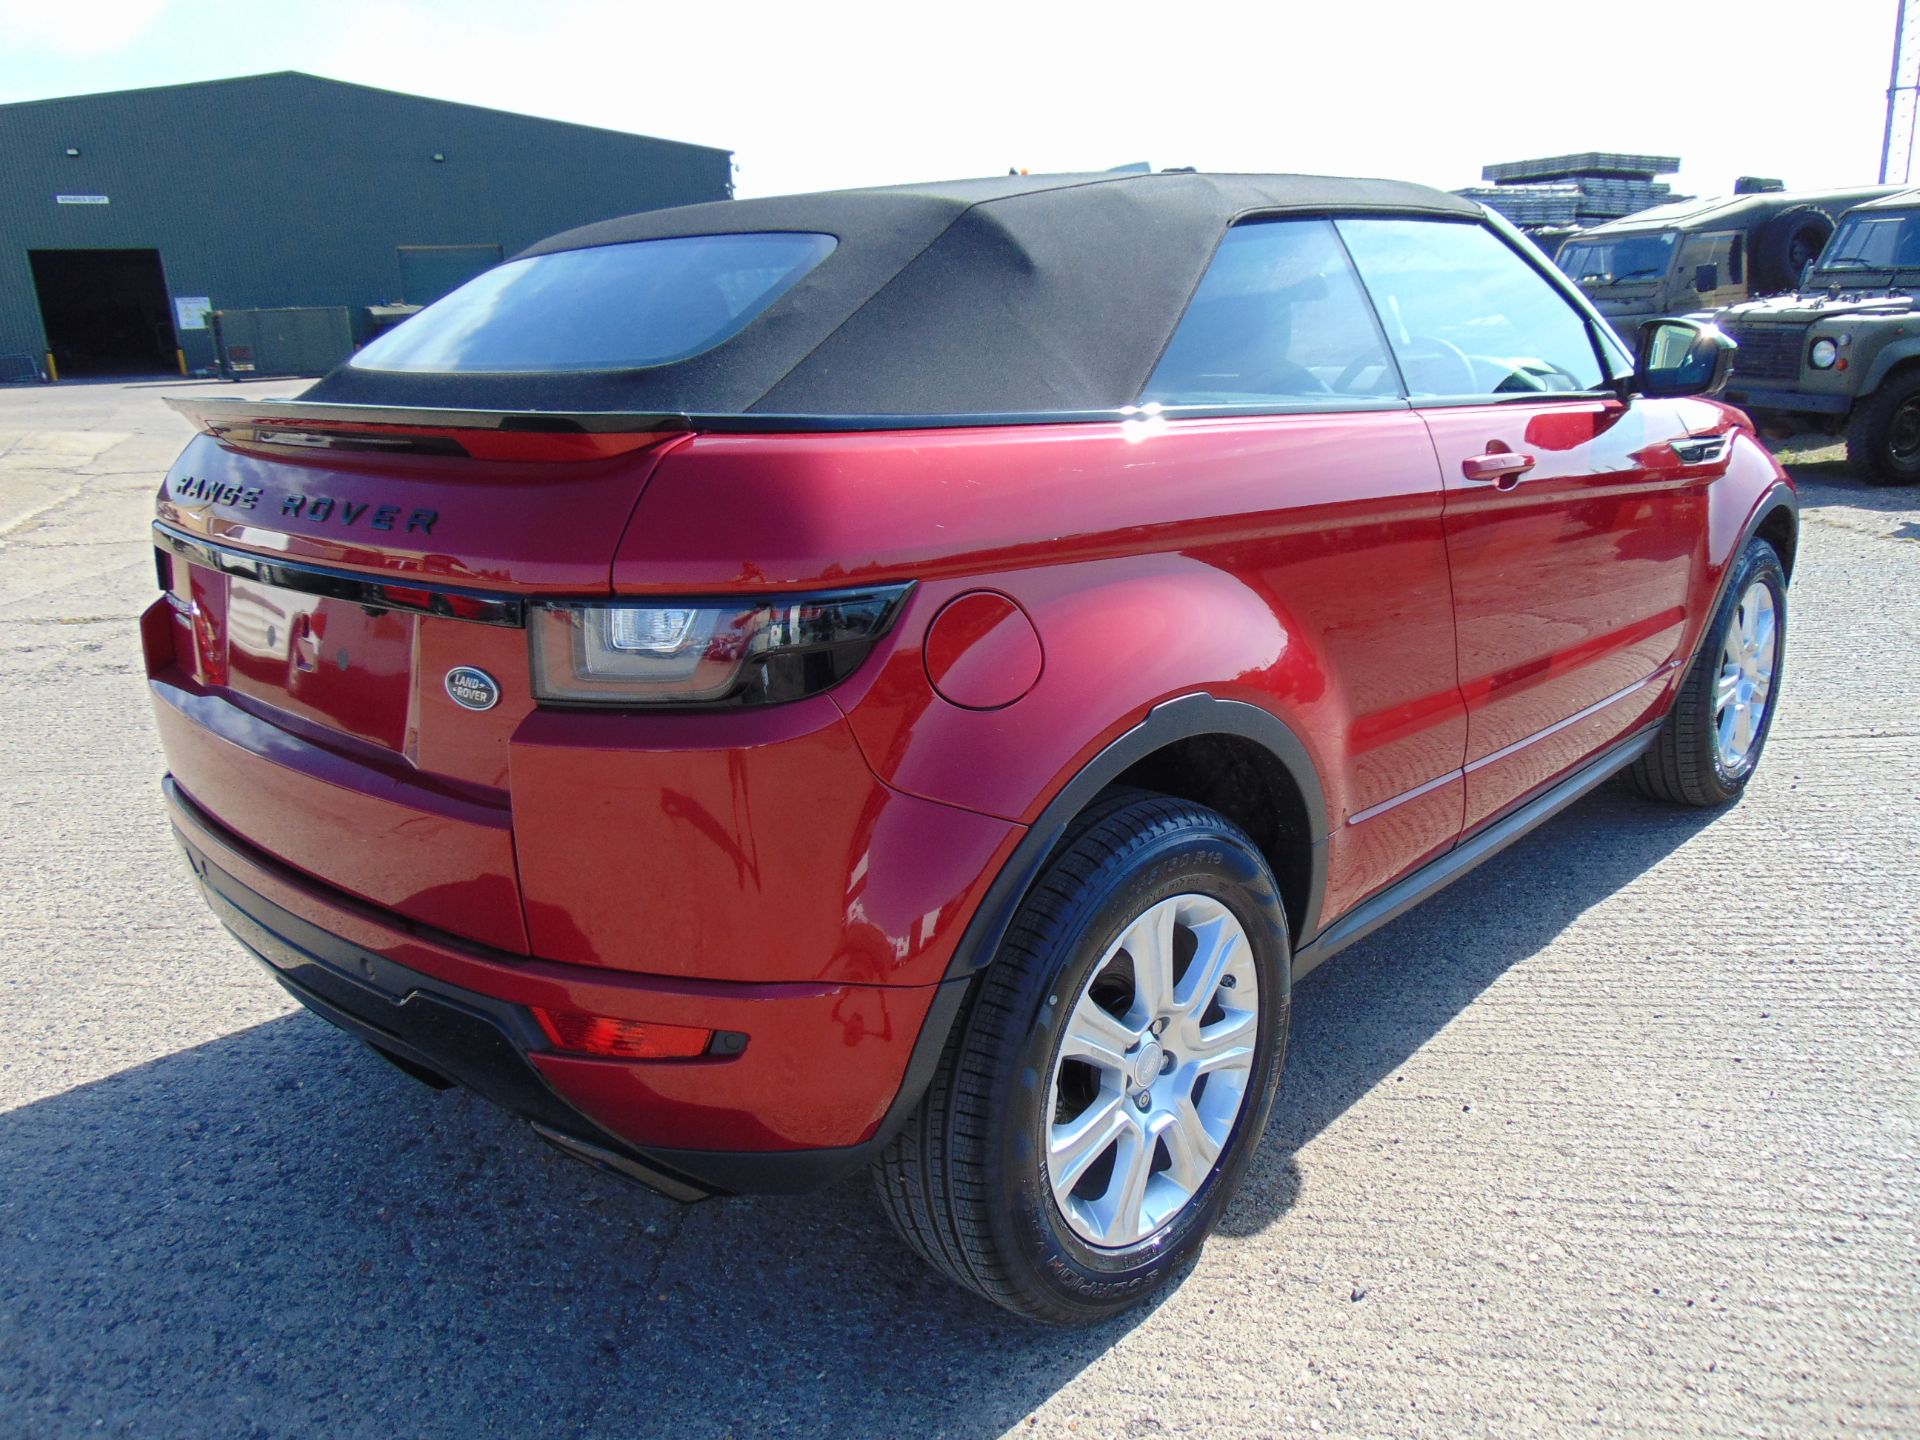 NEW UNUSED Range Rover Evoque 2.0 i4 HSE Dynamic Convertible - Image 13 of 39